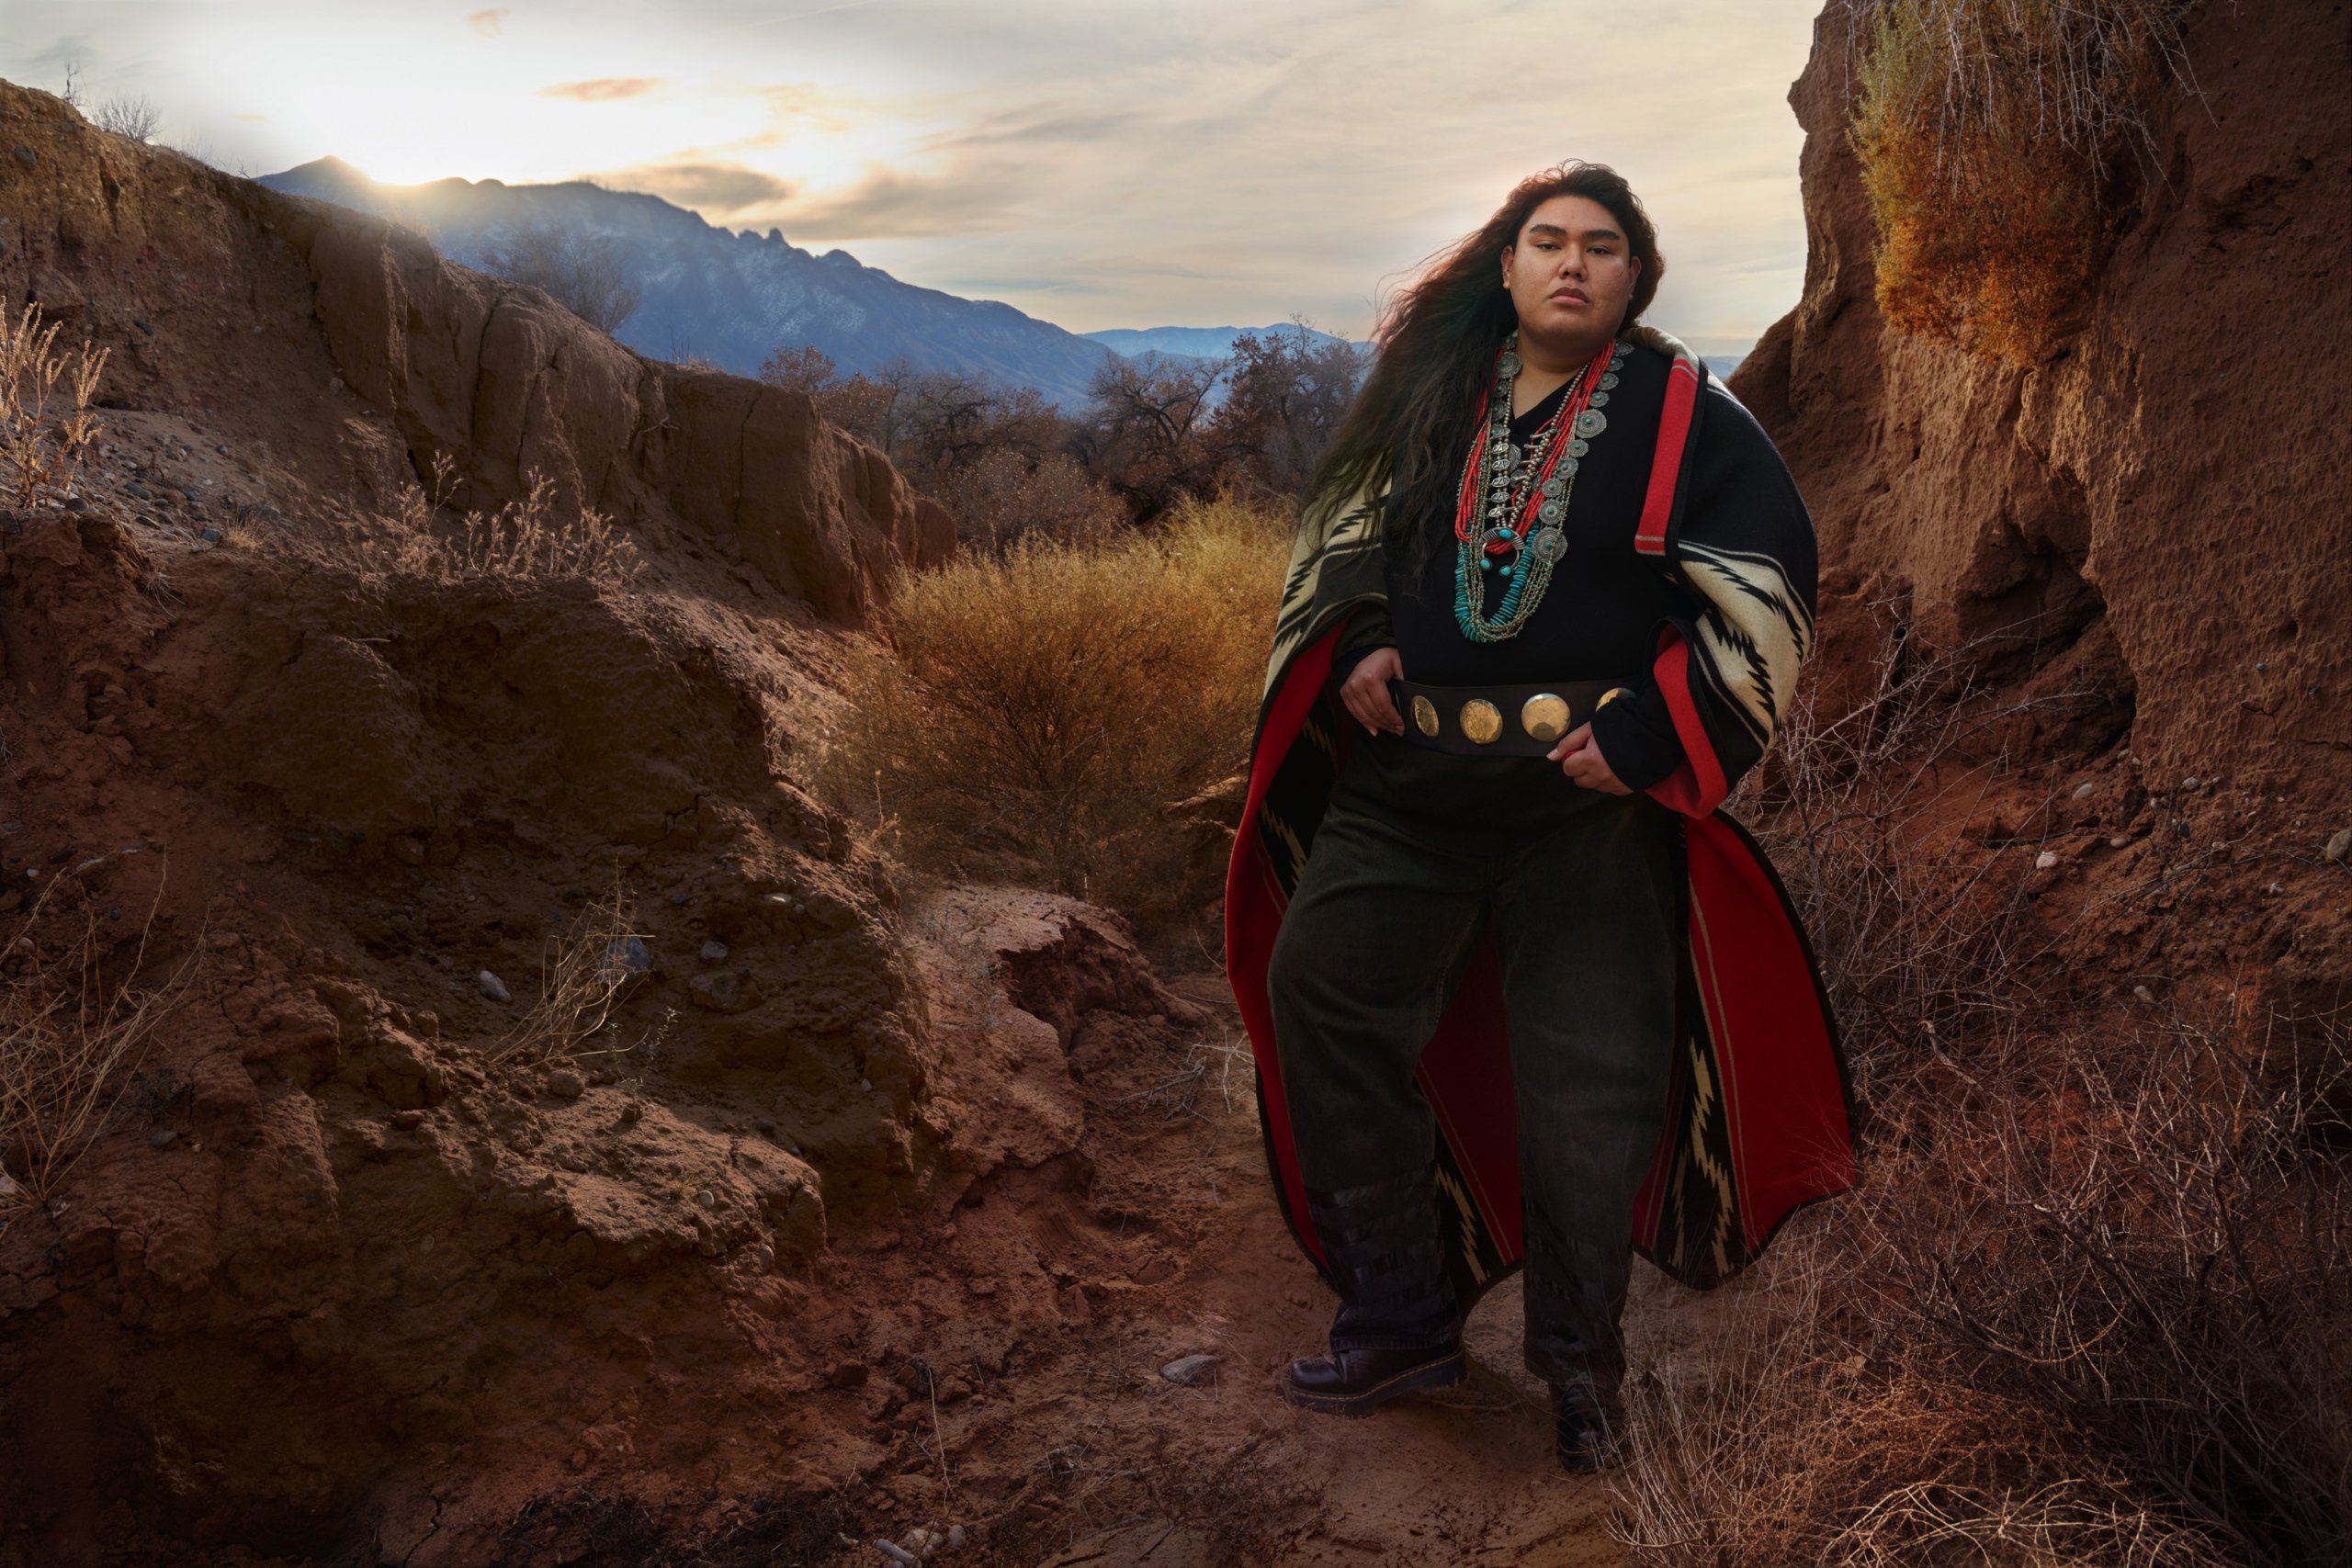 Kymon is standing outside wearing traditional Navajo clothes, large mountains in the background with the sun setting.